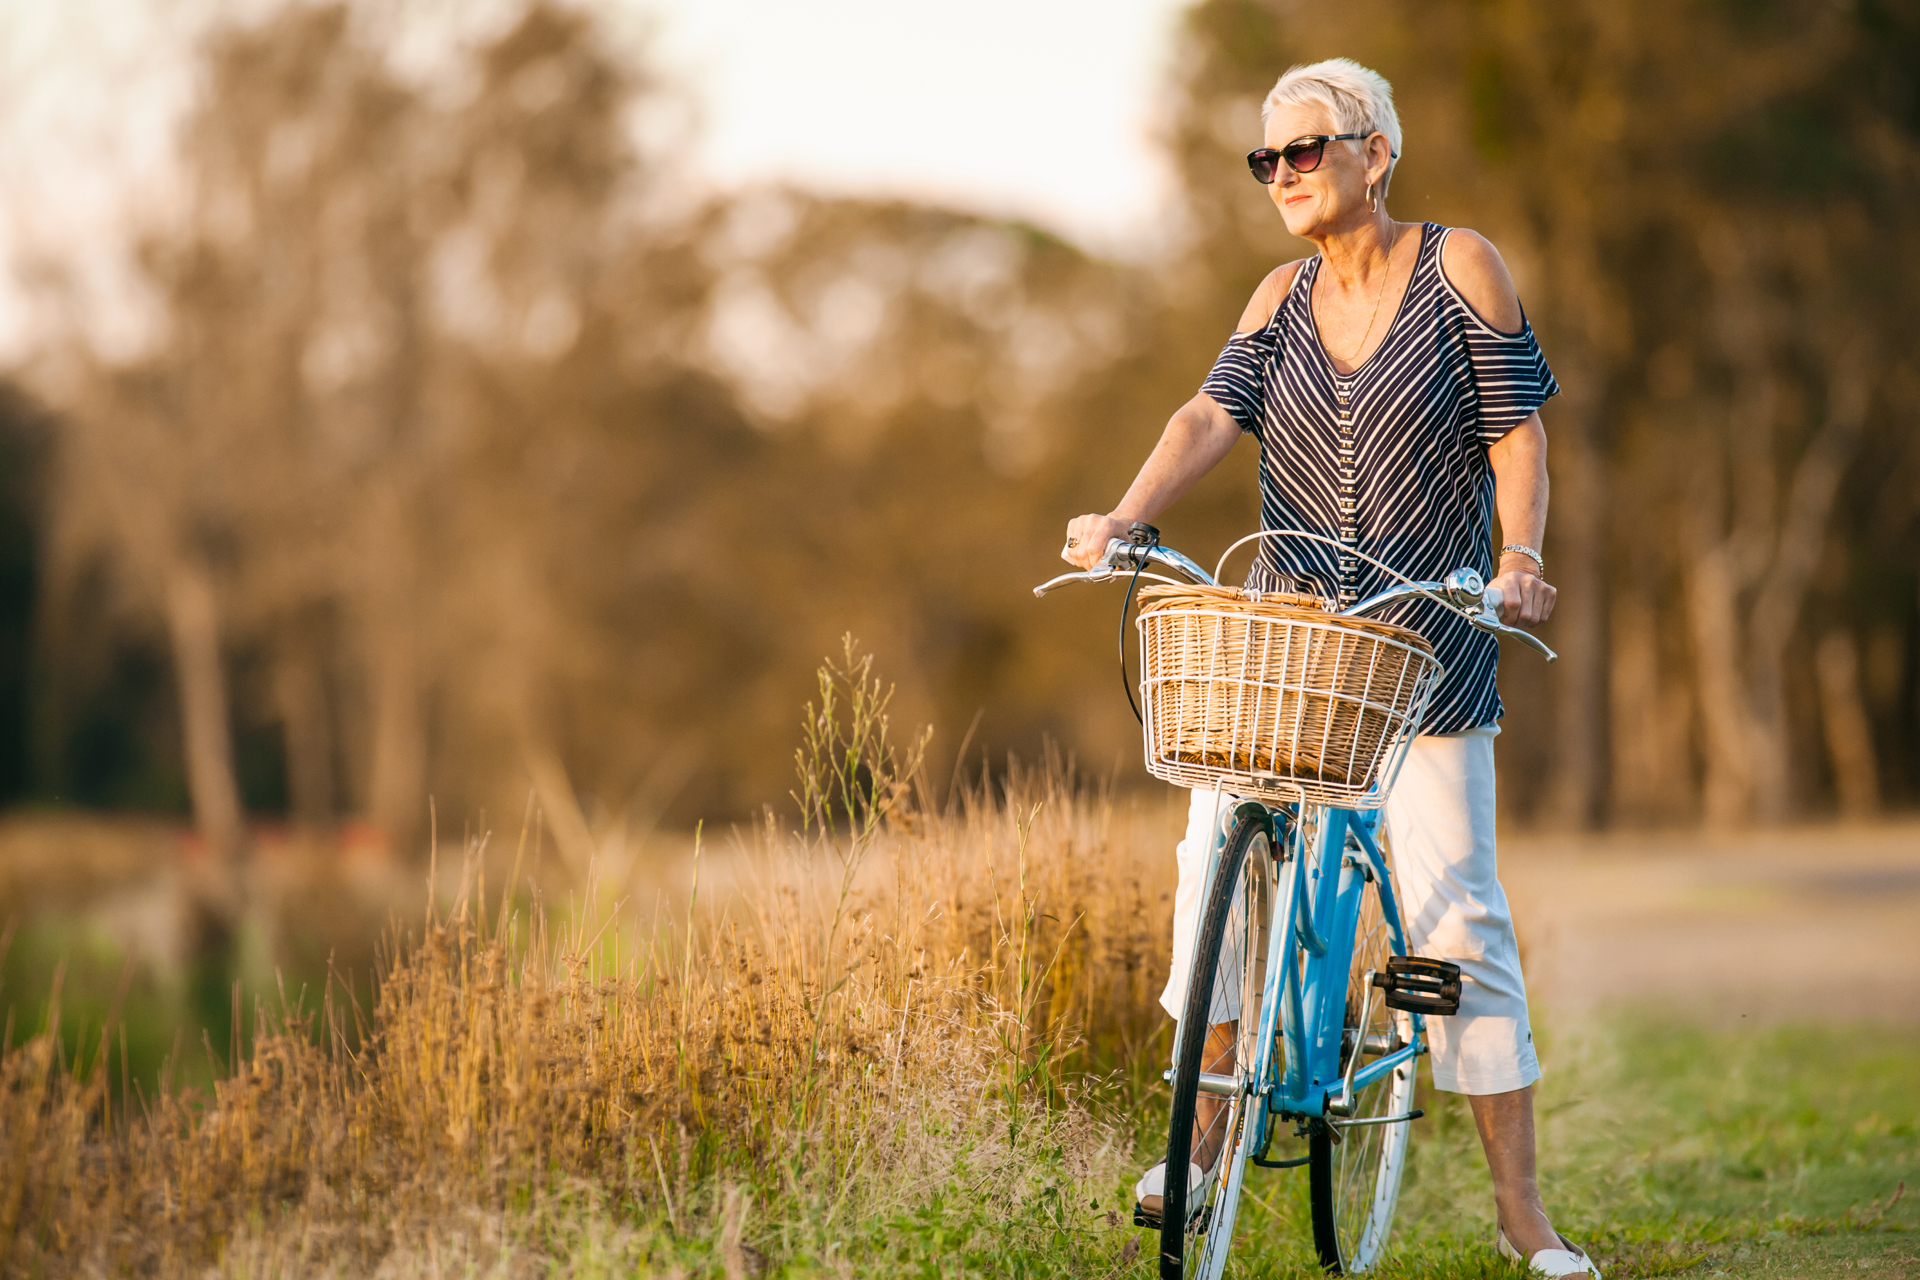 Close up shot of women on a bike with scenic background 